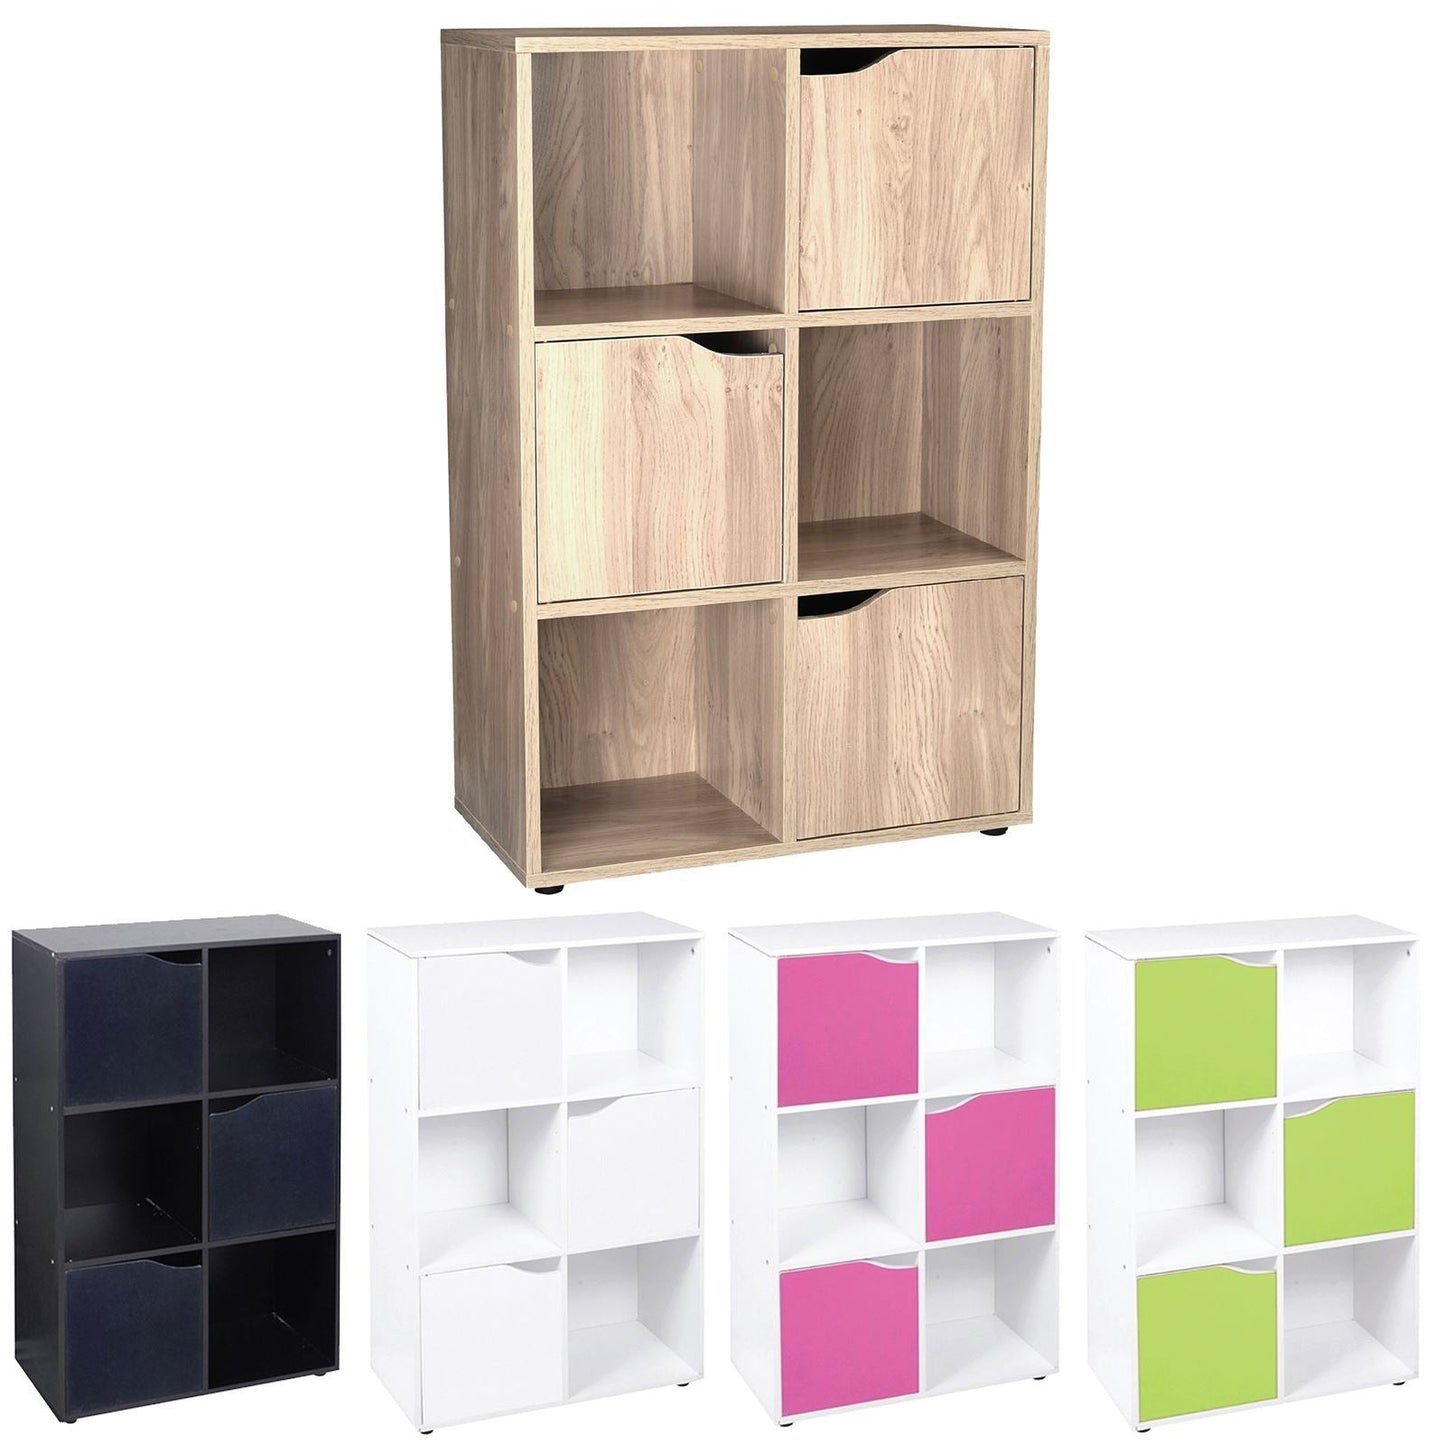 Bookcase with 6 cube storage units